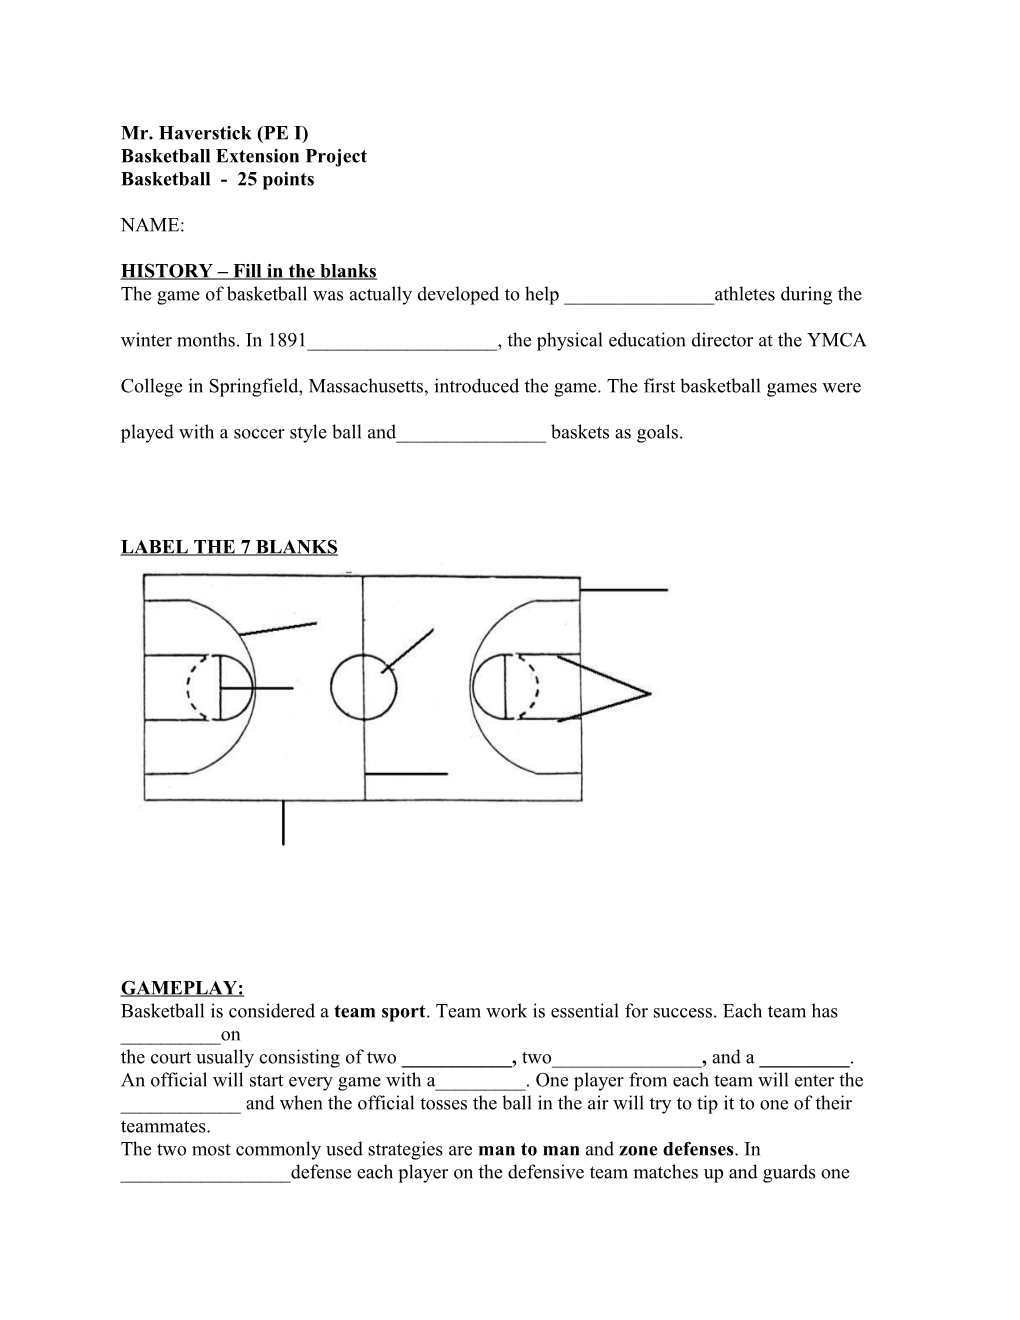 Basketball Extension Project